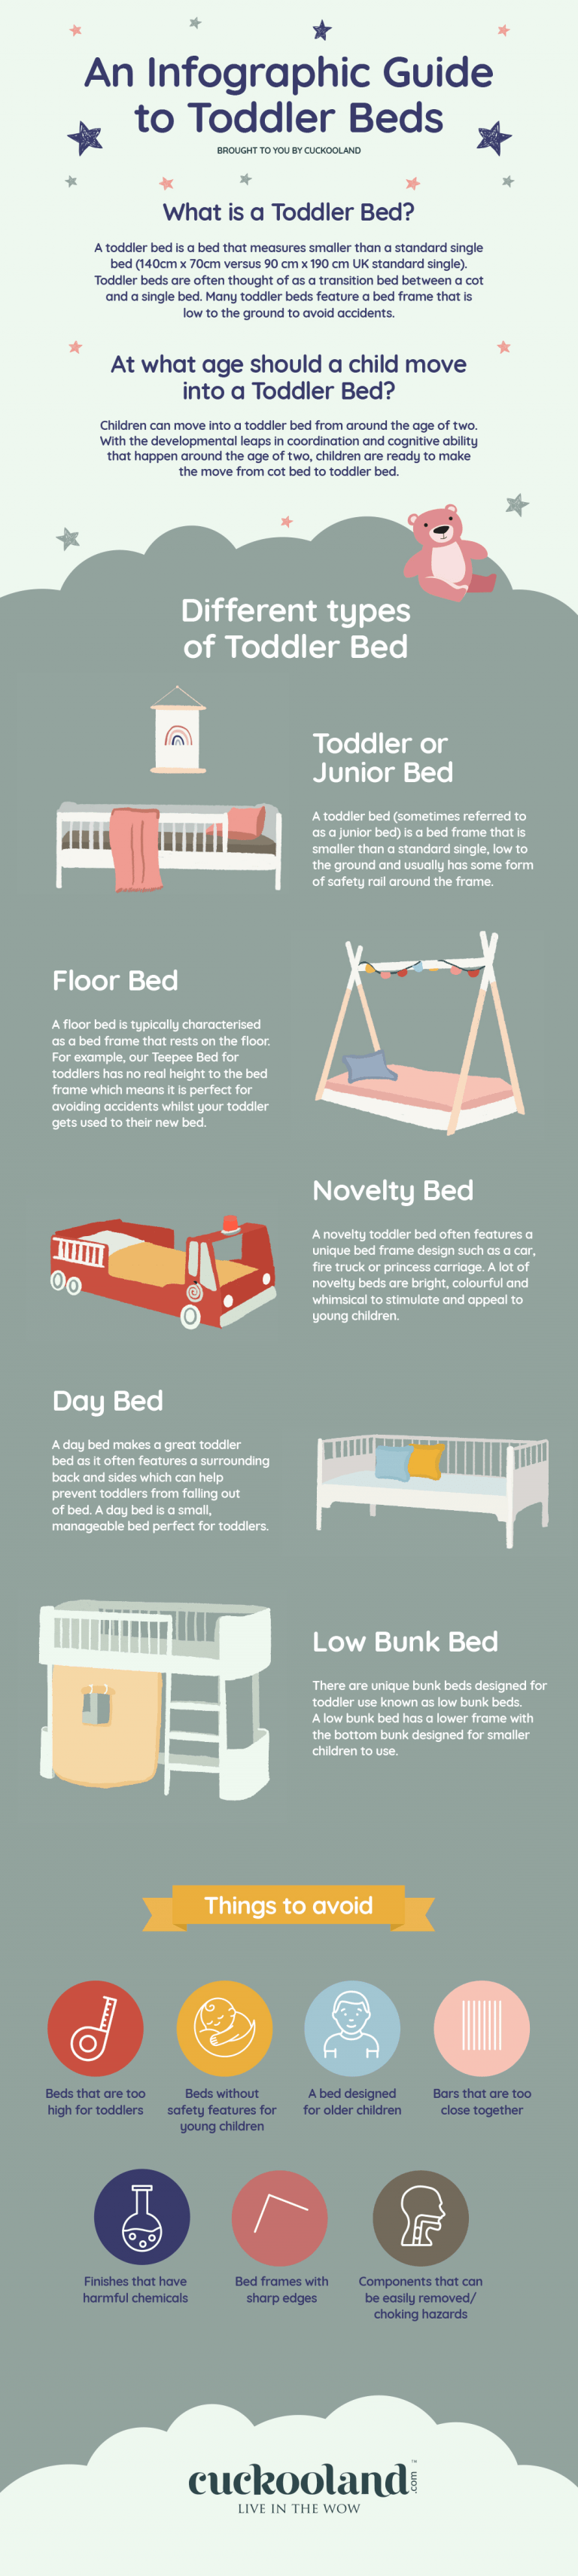 An Infographic Guide to Toddler Beds